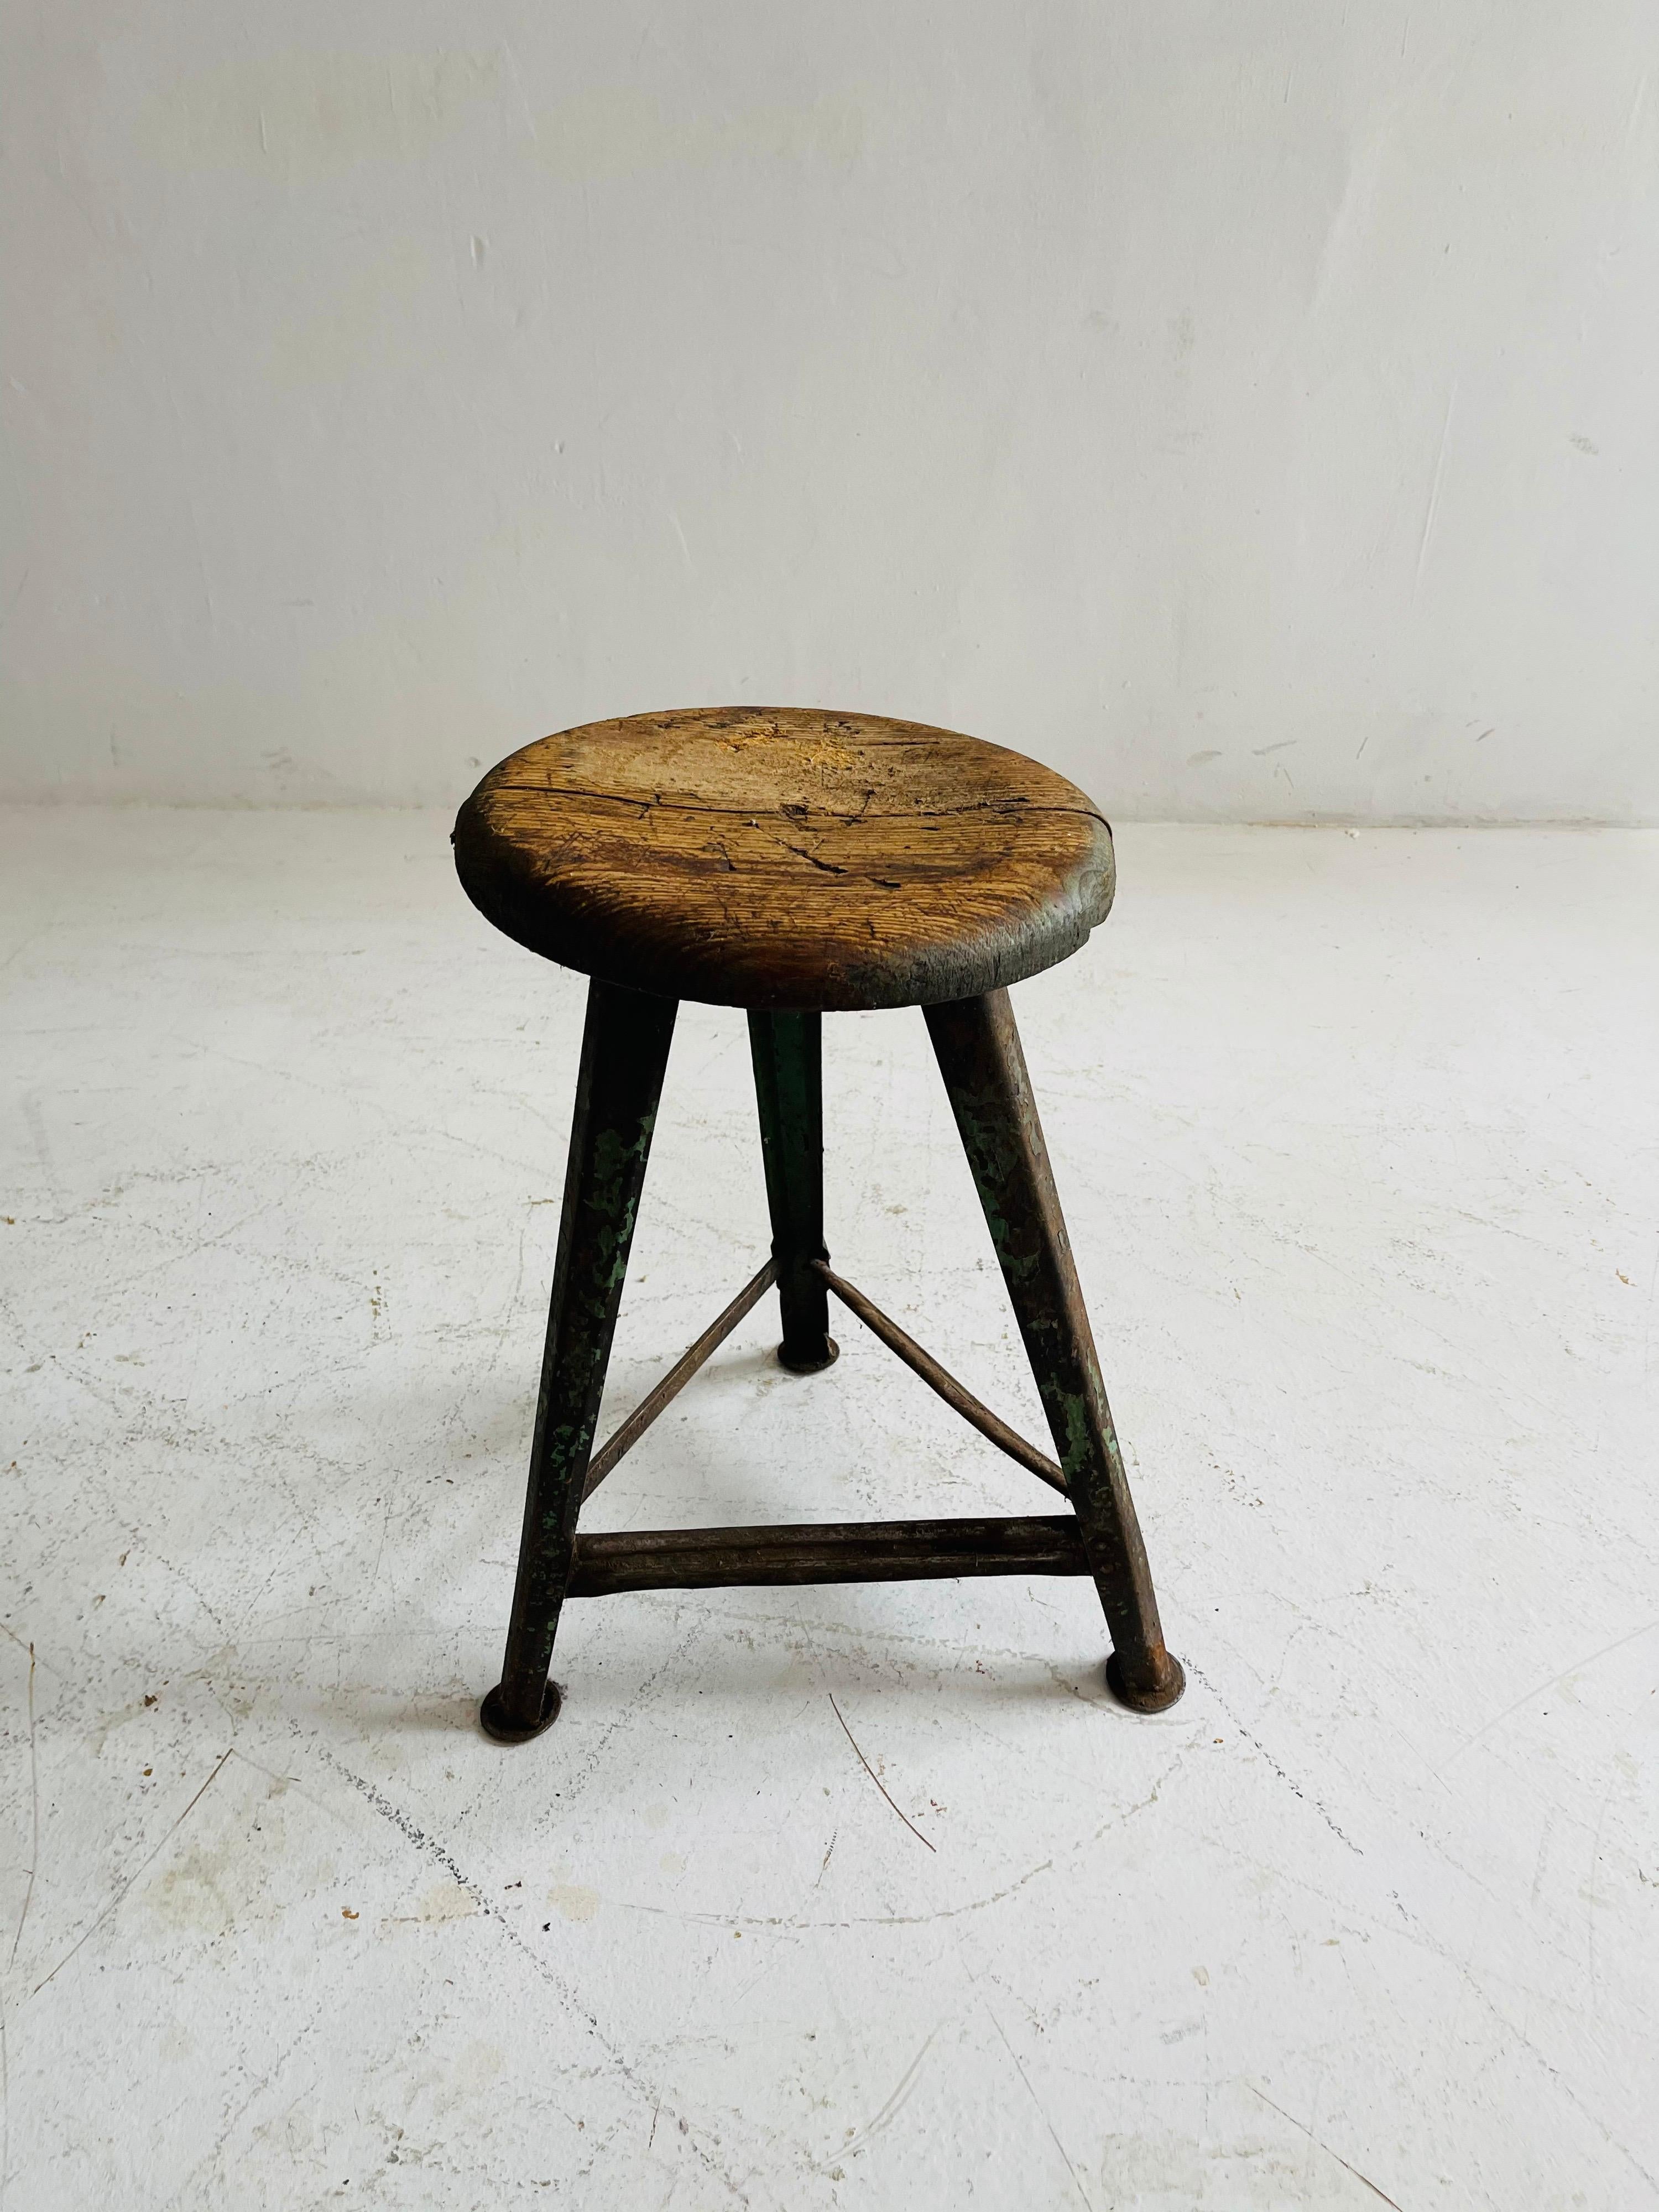 Patinated Industrial Factory Stools Group of Six, Austria, 1930s For Sale 3